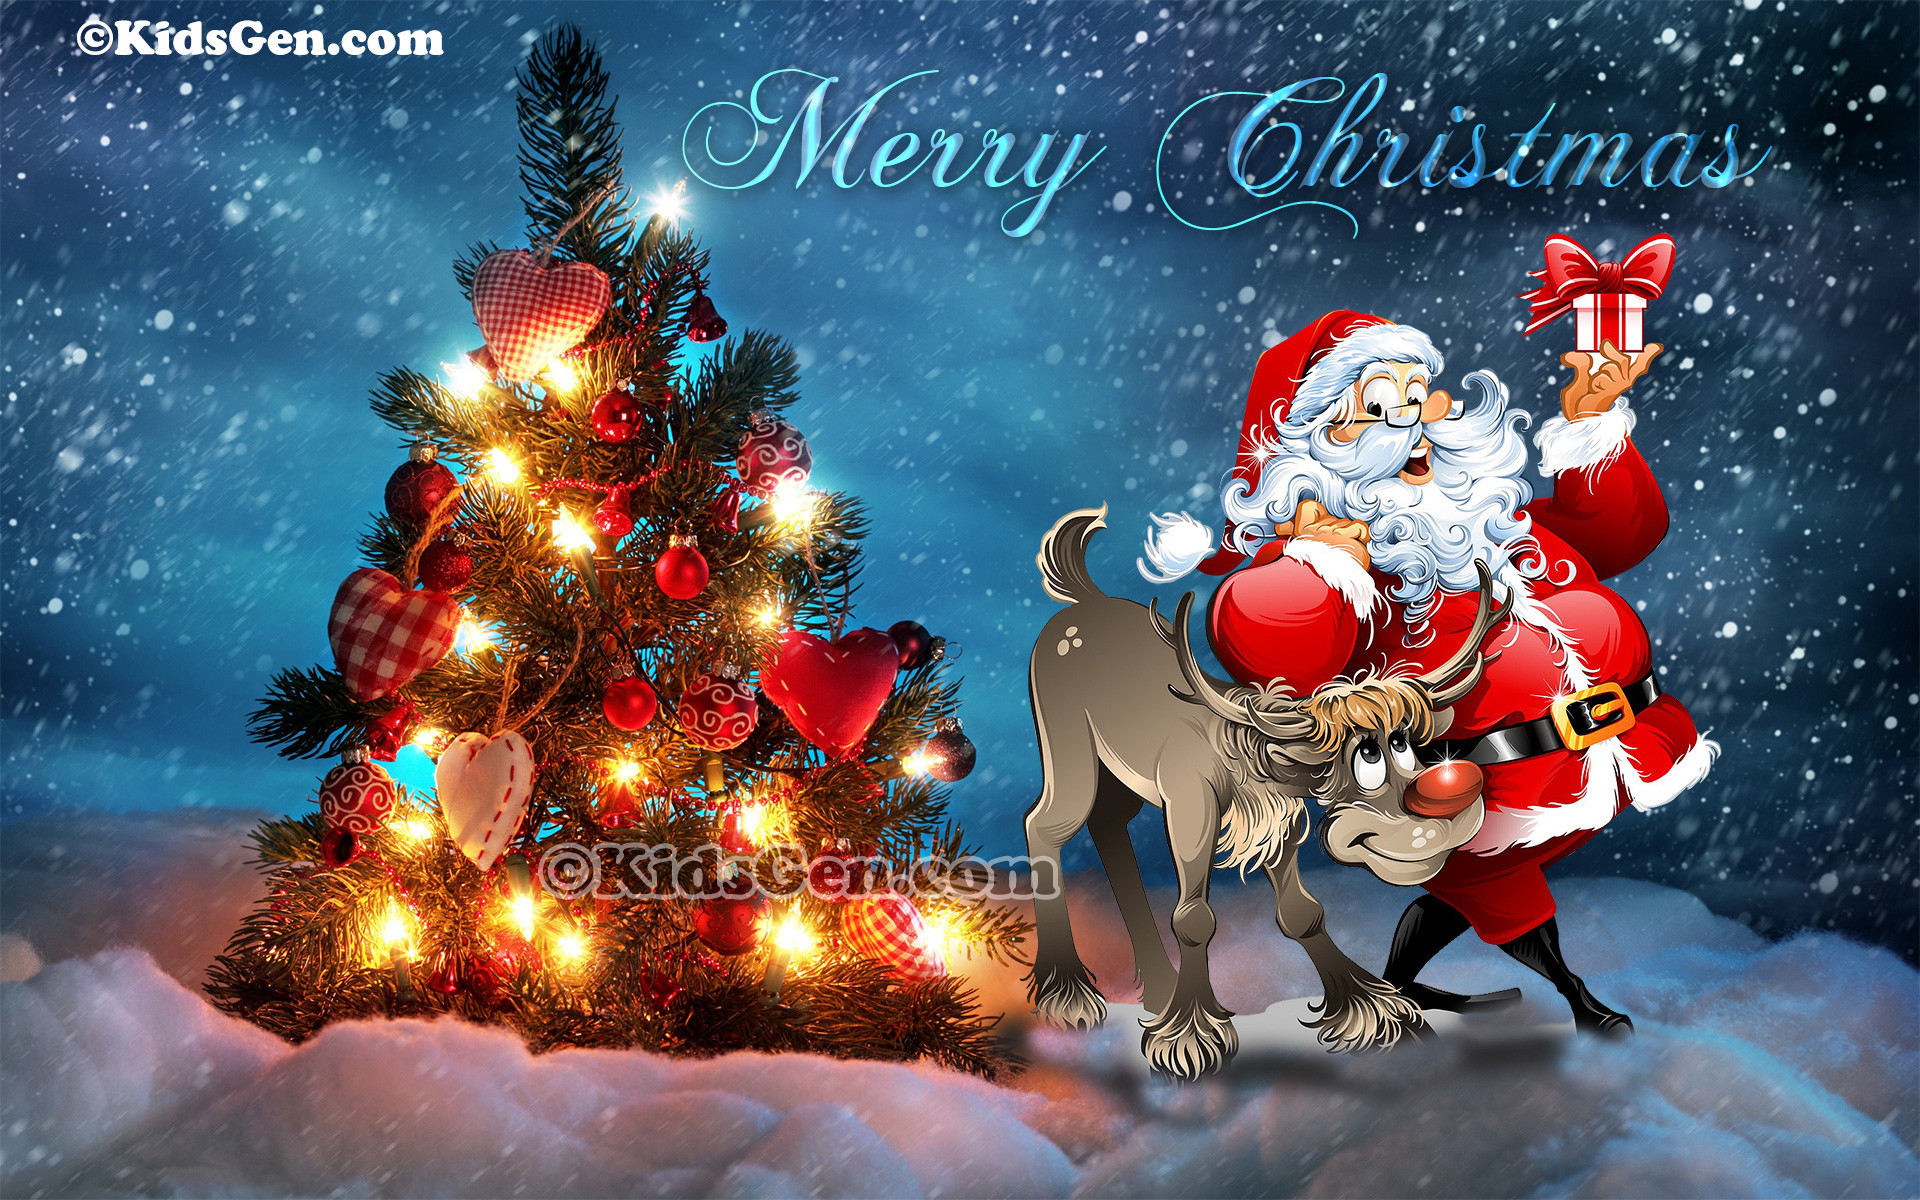 1920x1200 High Definition Christmas wallpaper featuring Santa and Rudolph